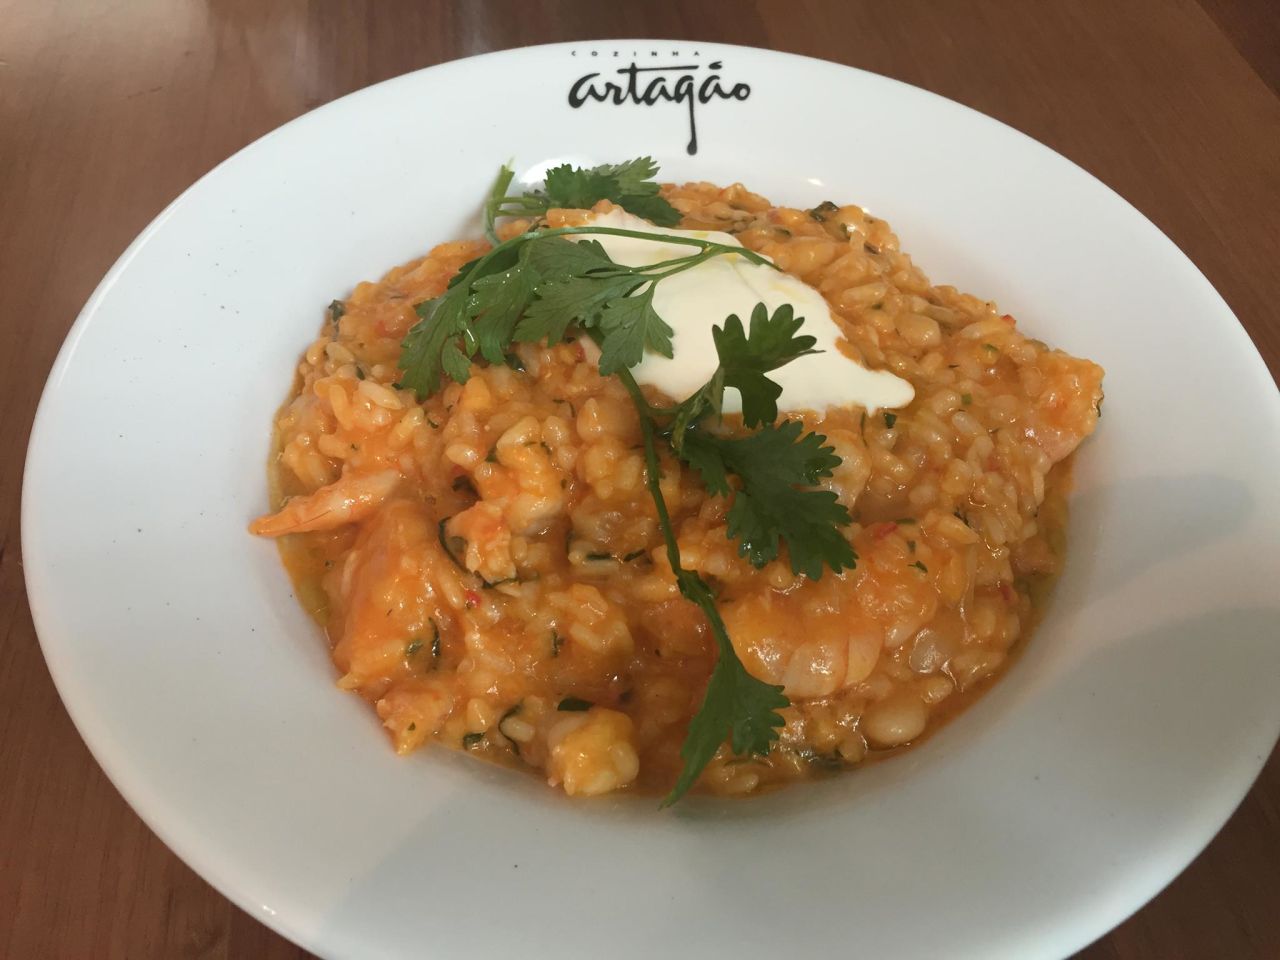 Chef Pedro de Artagao, behind other popular restaurants across town, has another success on his hands thanks to new venue Cozinha Artagao. Menu highlights include 12-hour roast beef, gorgonzola pasta and gnocchi made from cassava. 